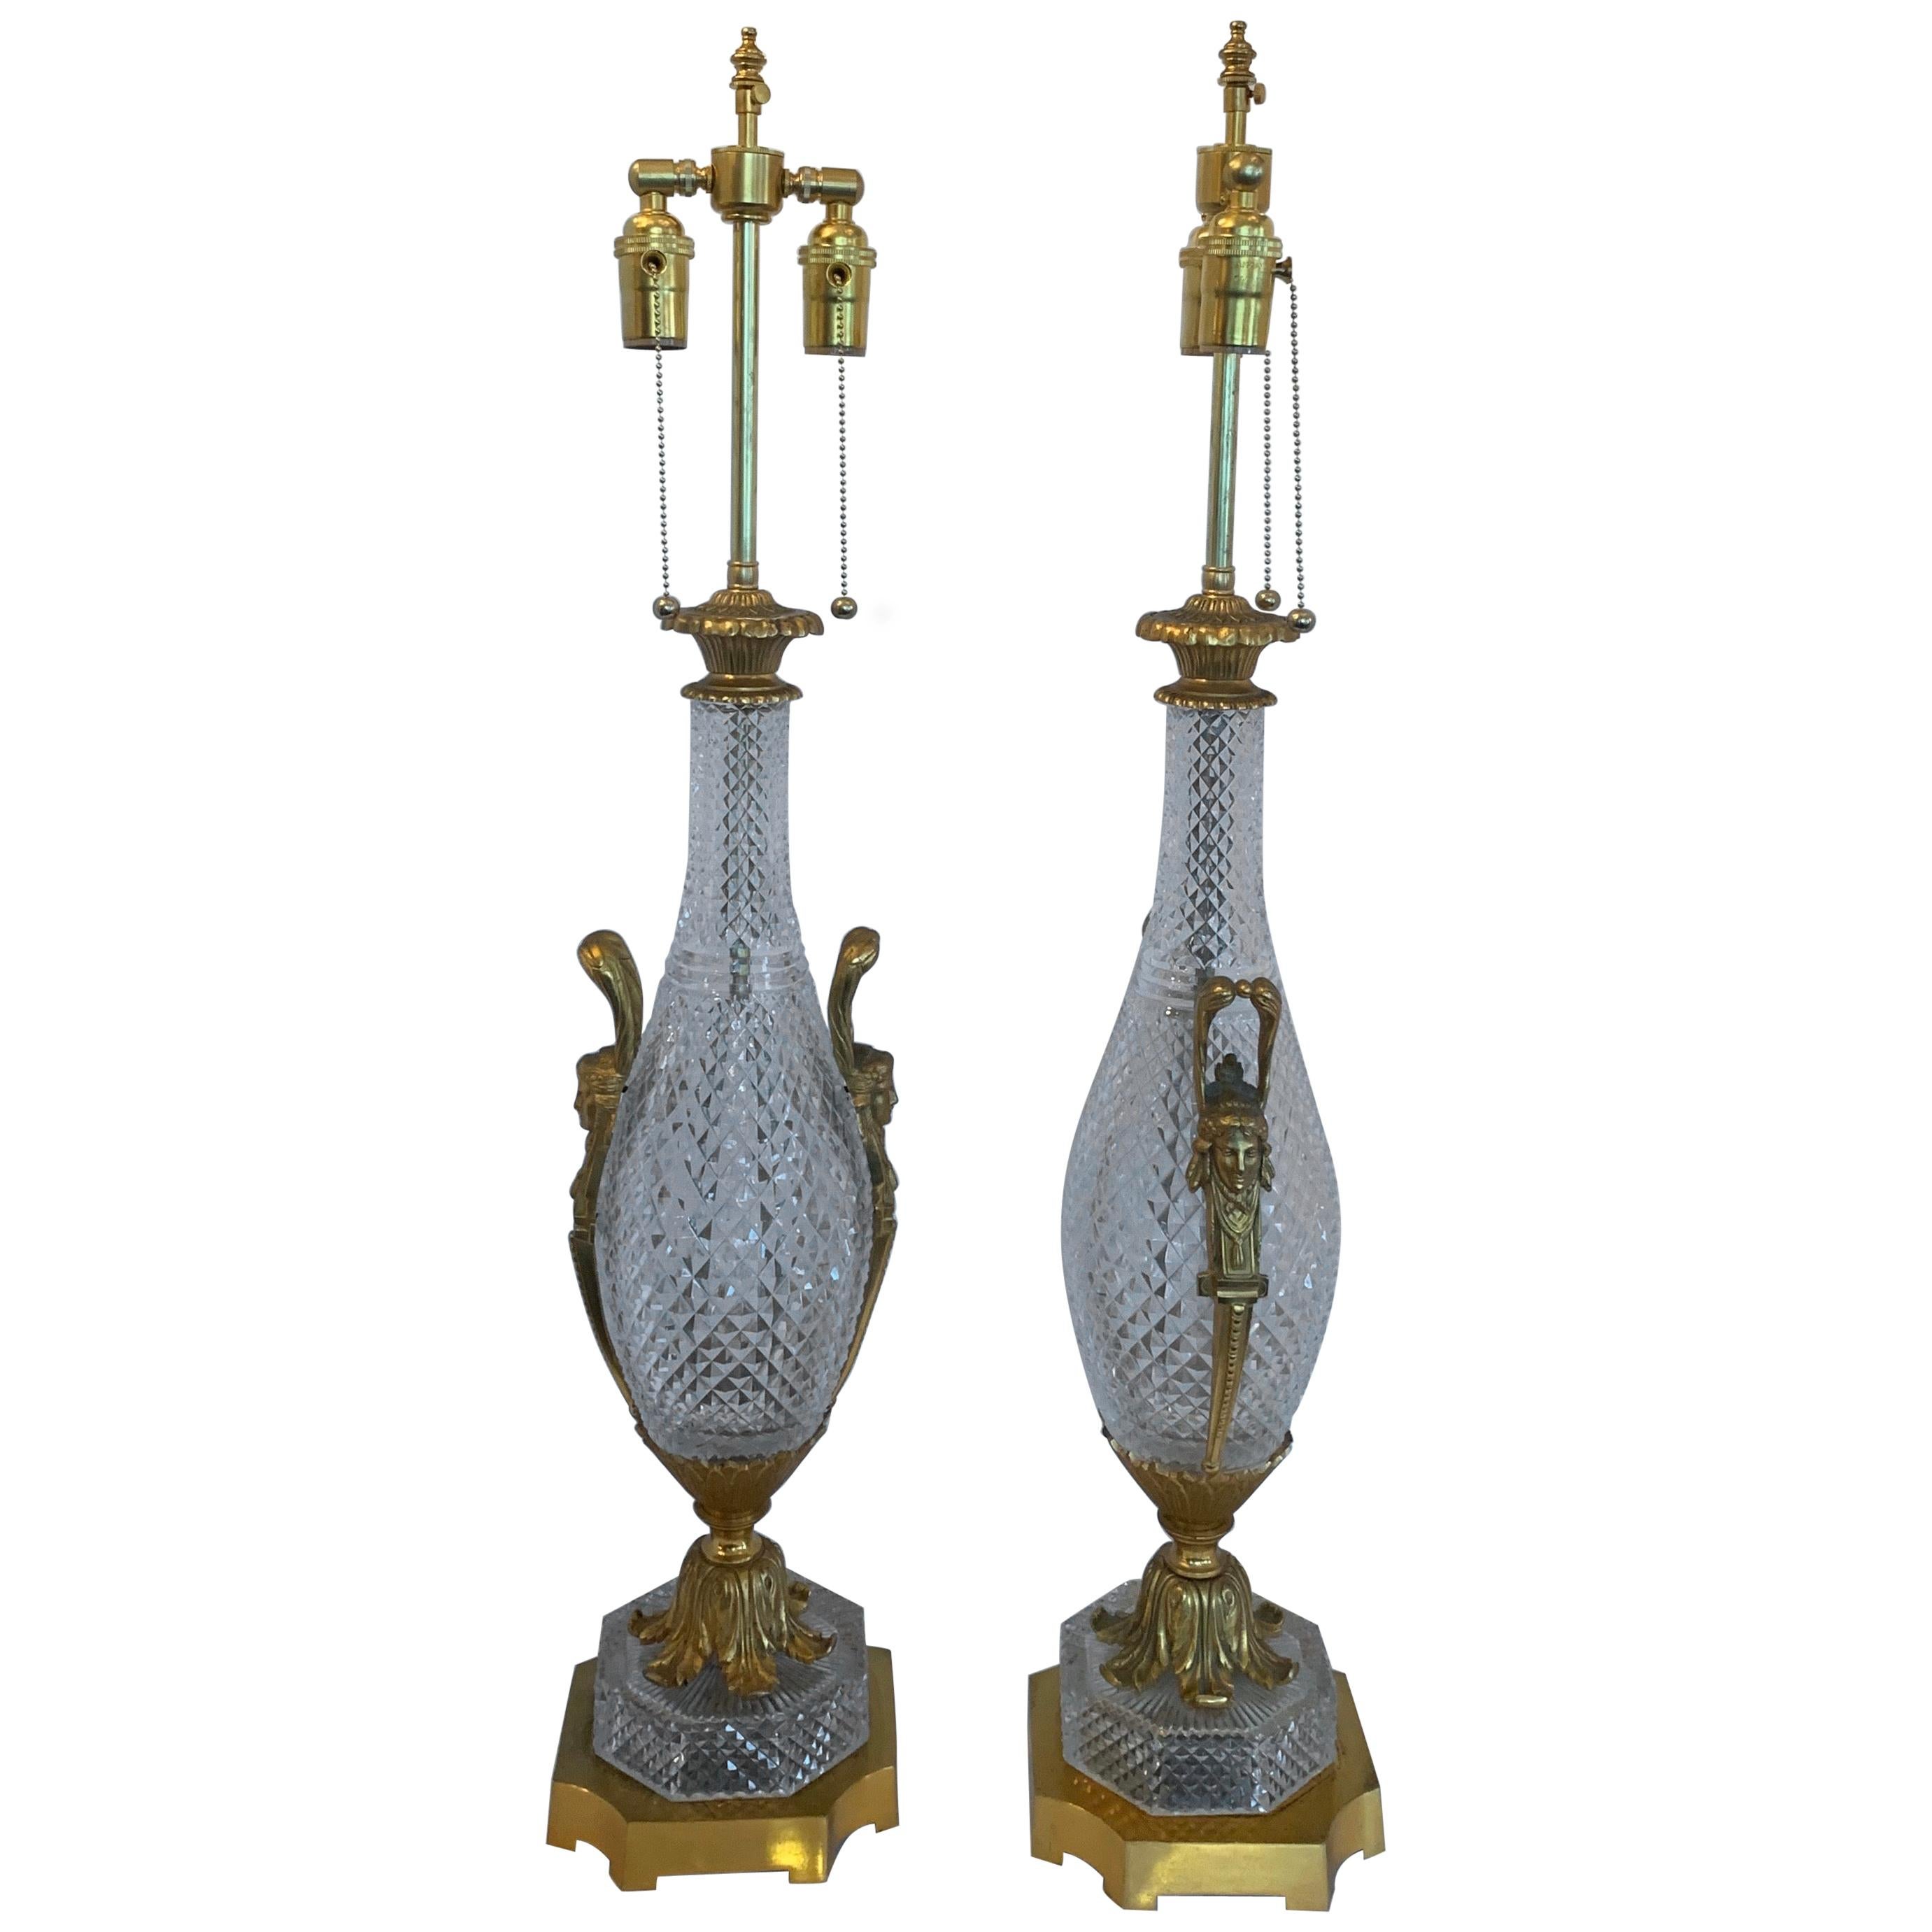 Wonderful Pair French Gilt Dore Bronze Cut Crystal Baccarat Urn Form Lamps